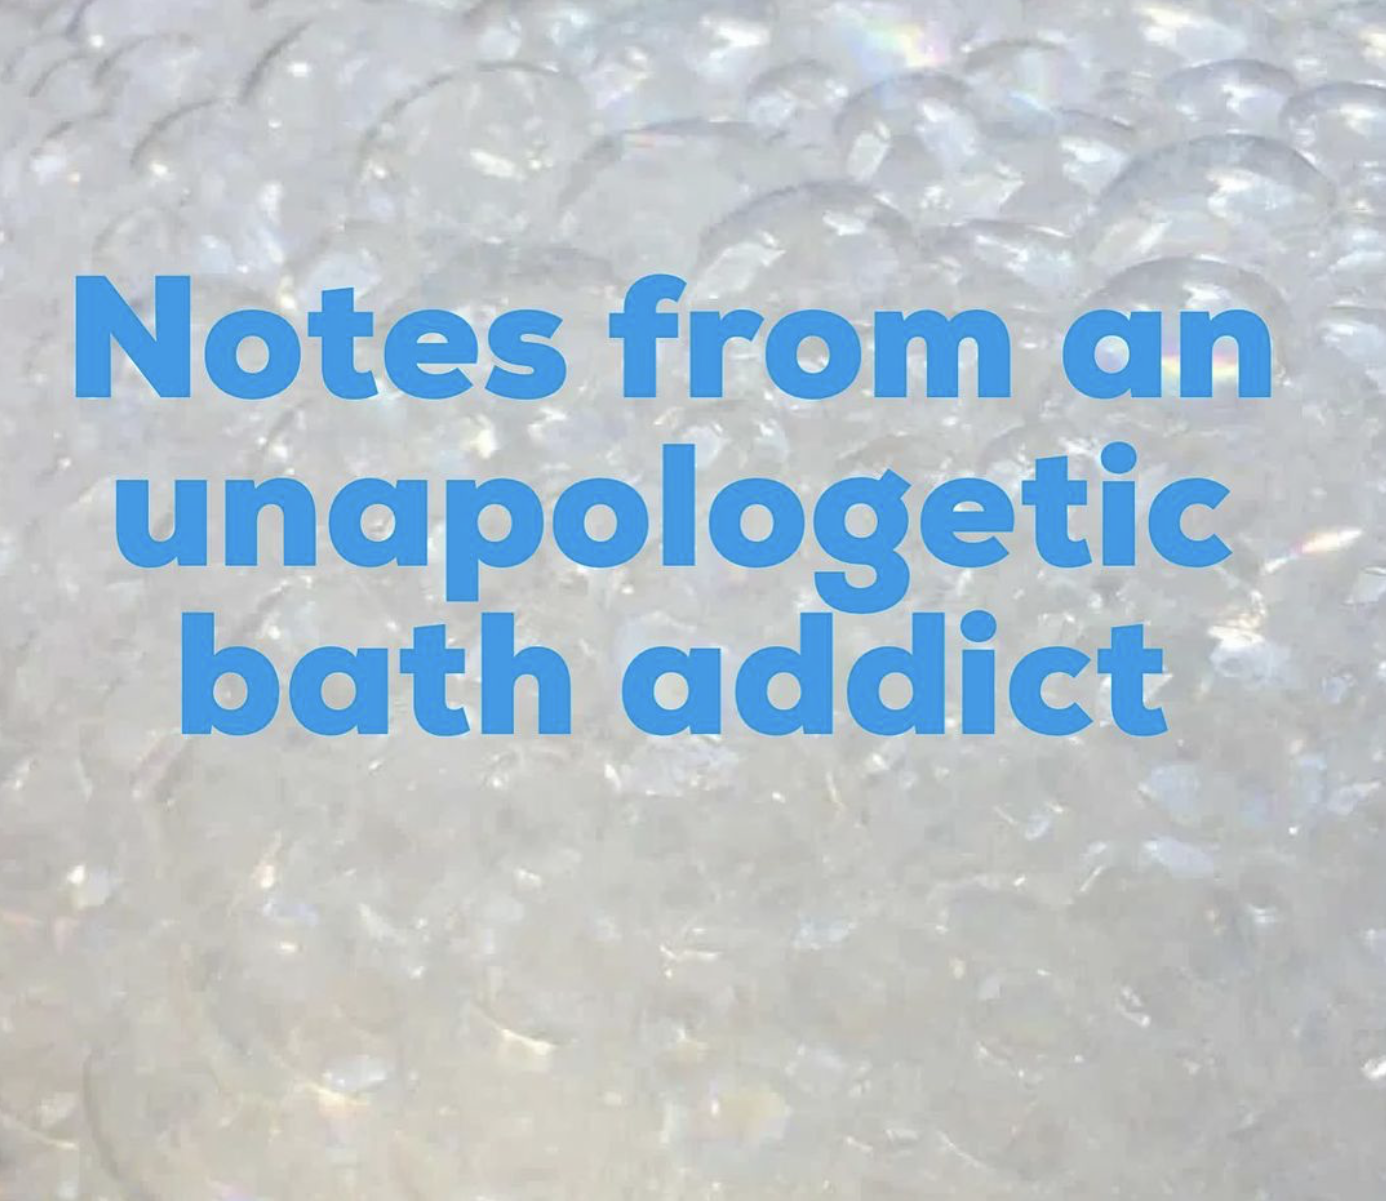 Notes from an unapologetic bath addict